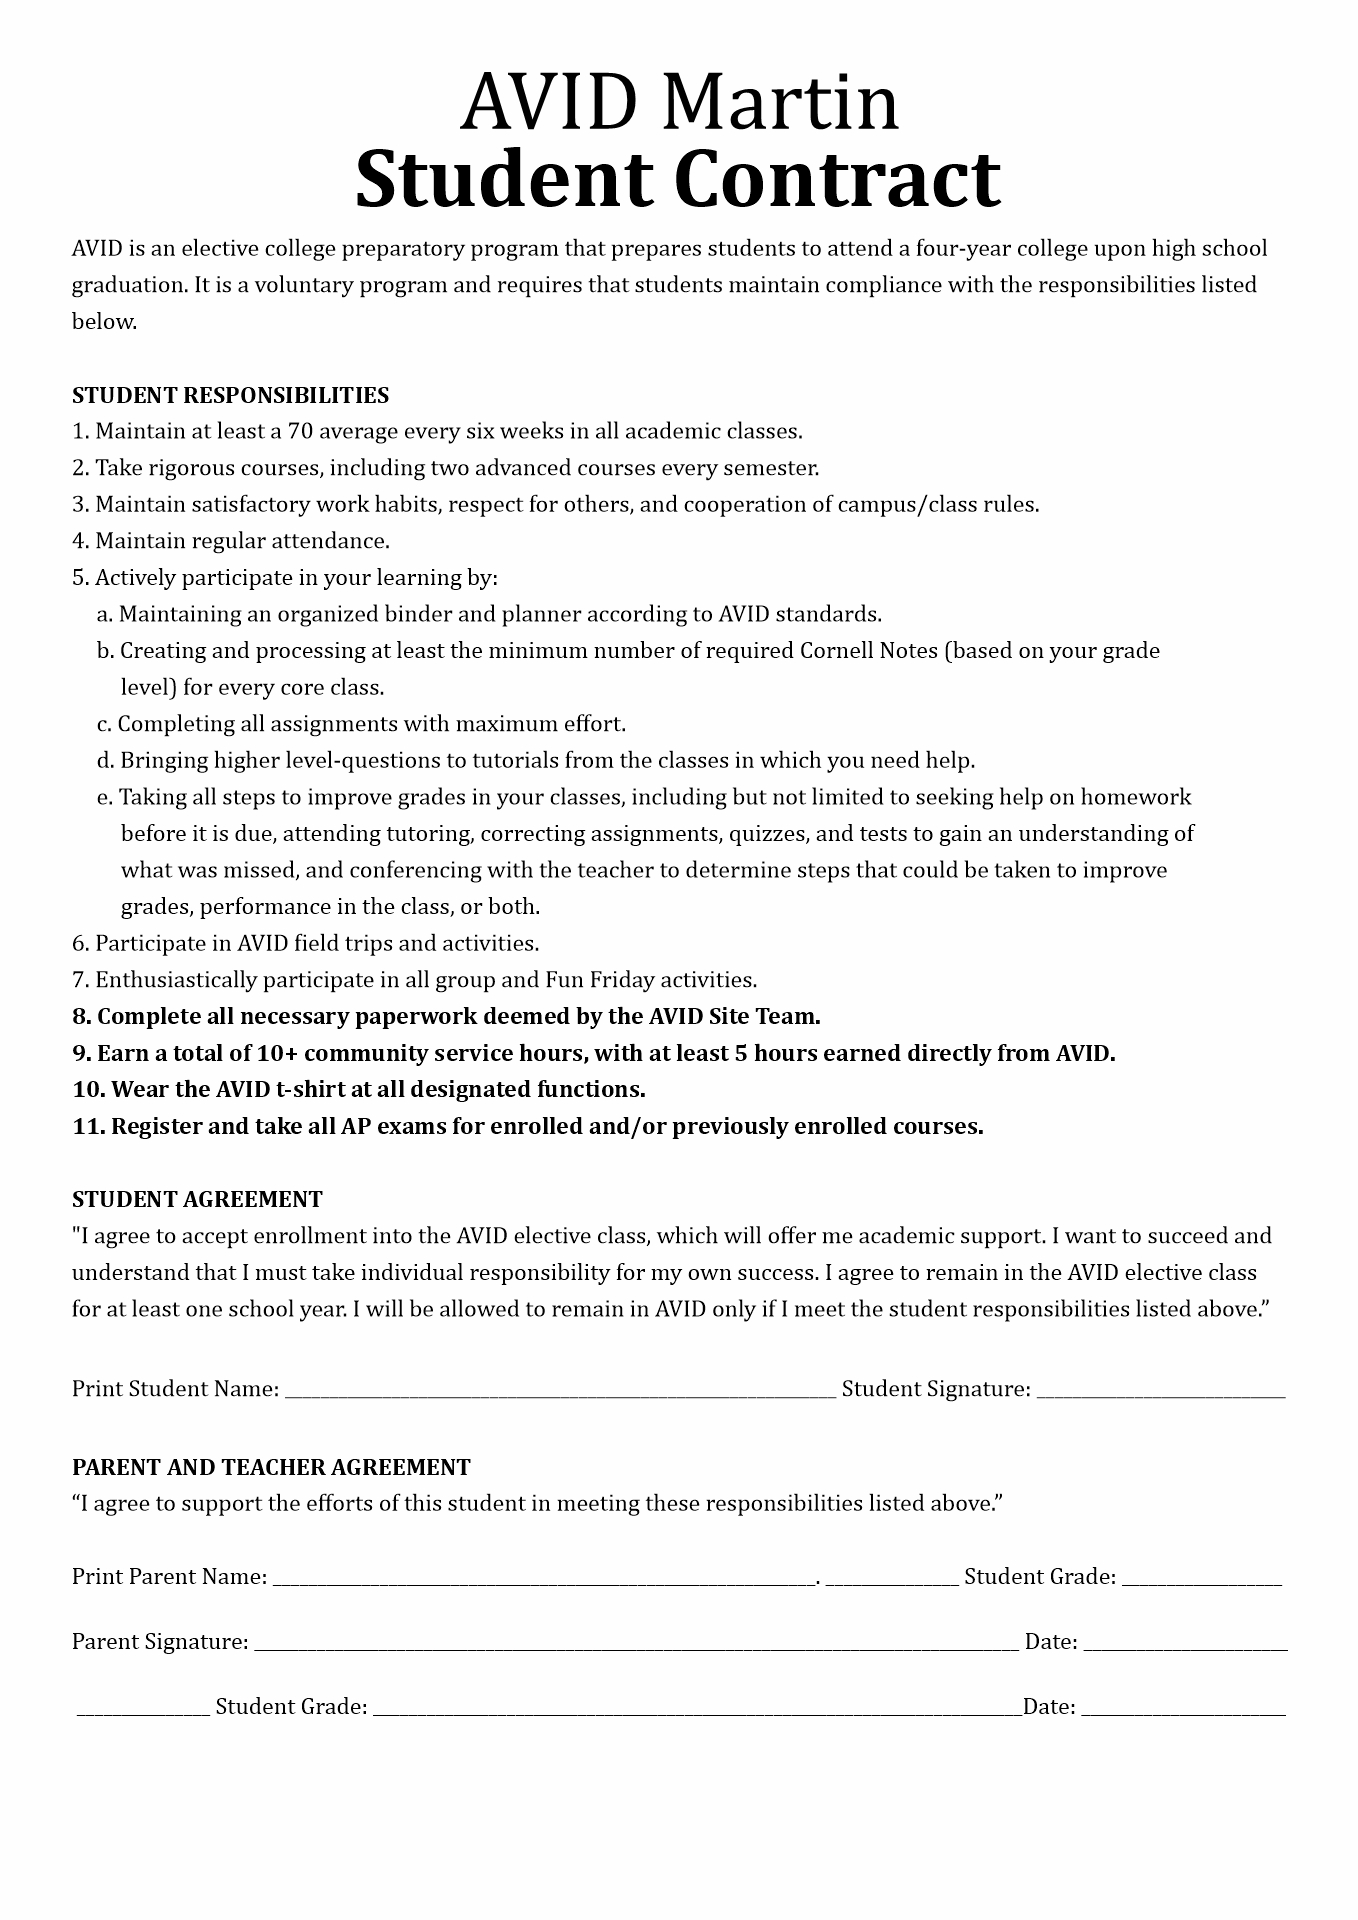 Avid Student Contract Image